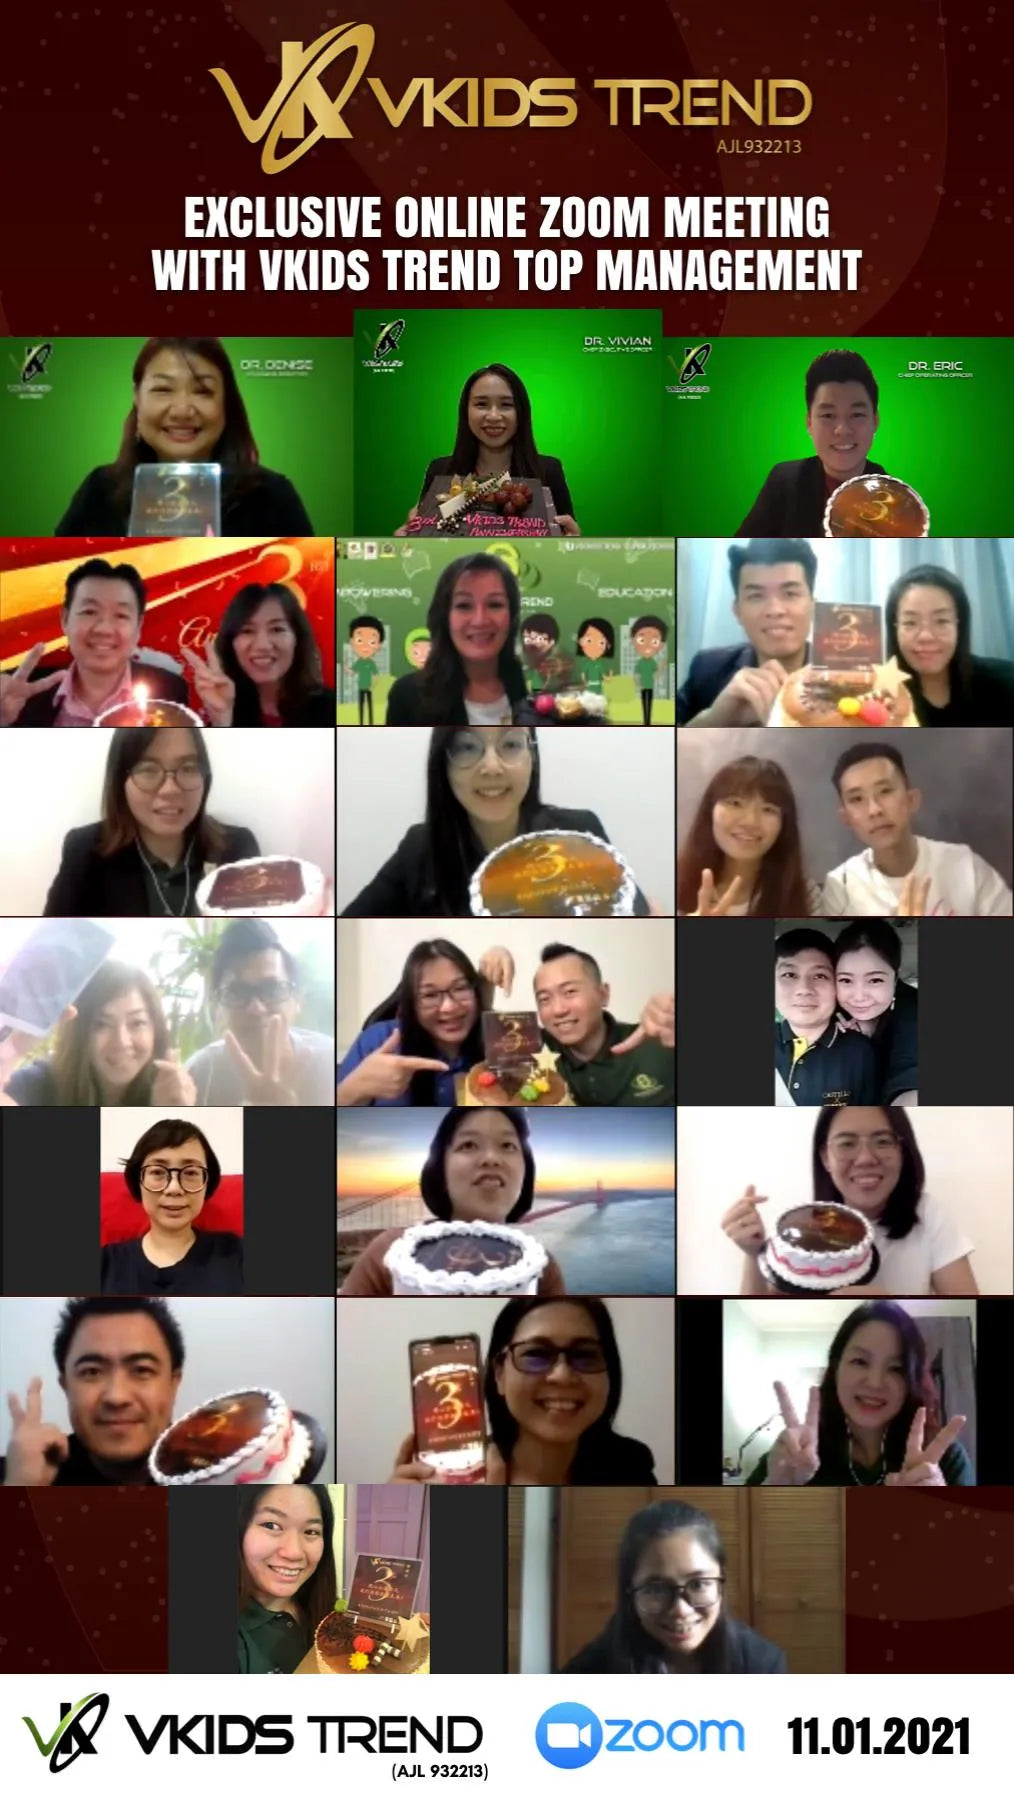 Vkids Trend Founders And Leaders Meet Online Via Zoom To Celebrate Their 3rd Anniversary